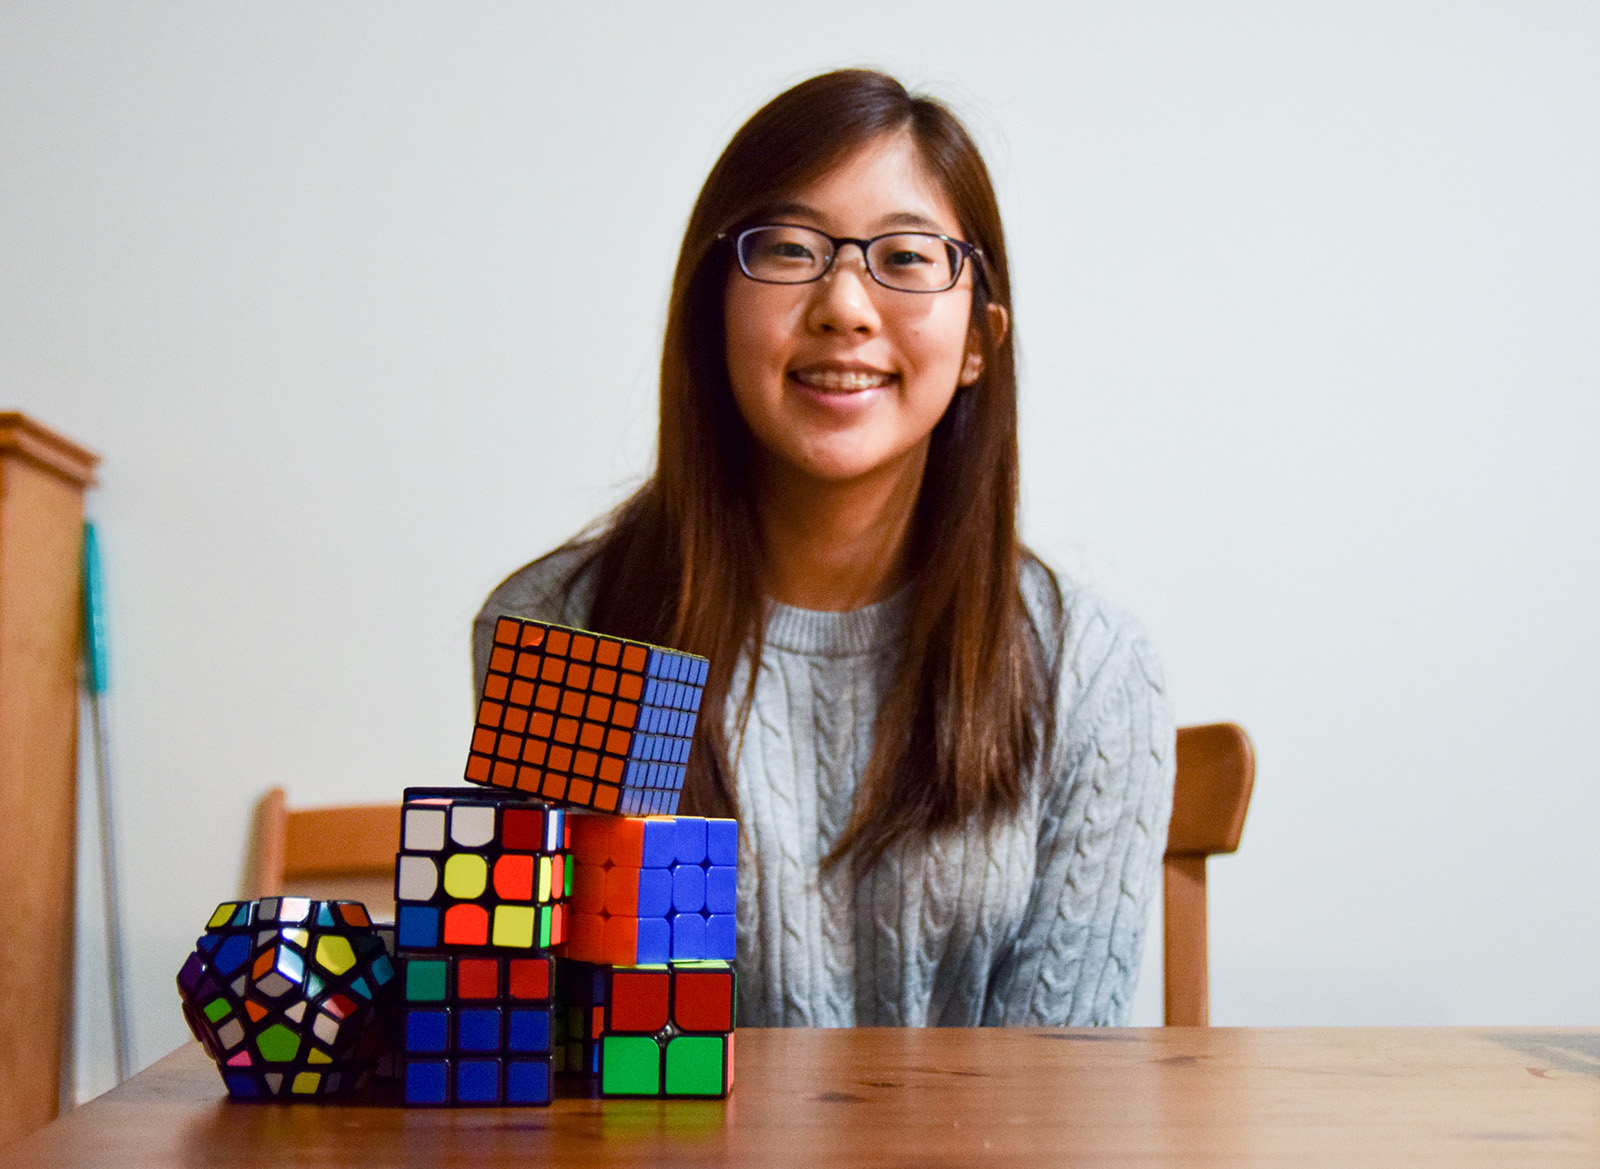 Cubing Club at UCLA puzzles over Rubik’s Cubes, builds cuber community